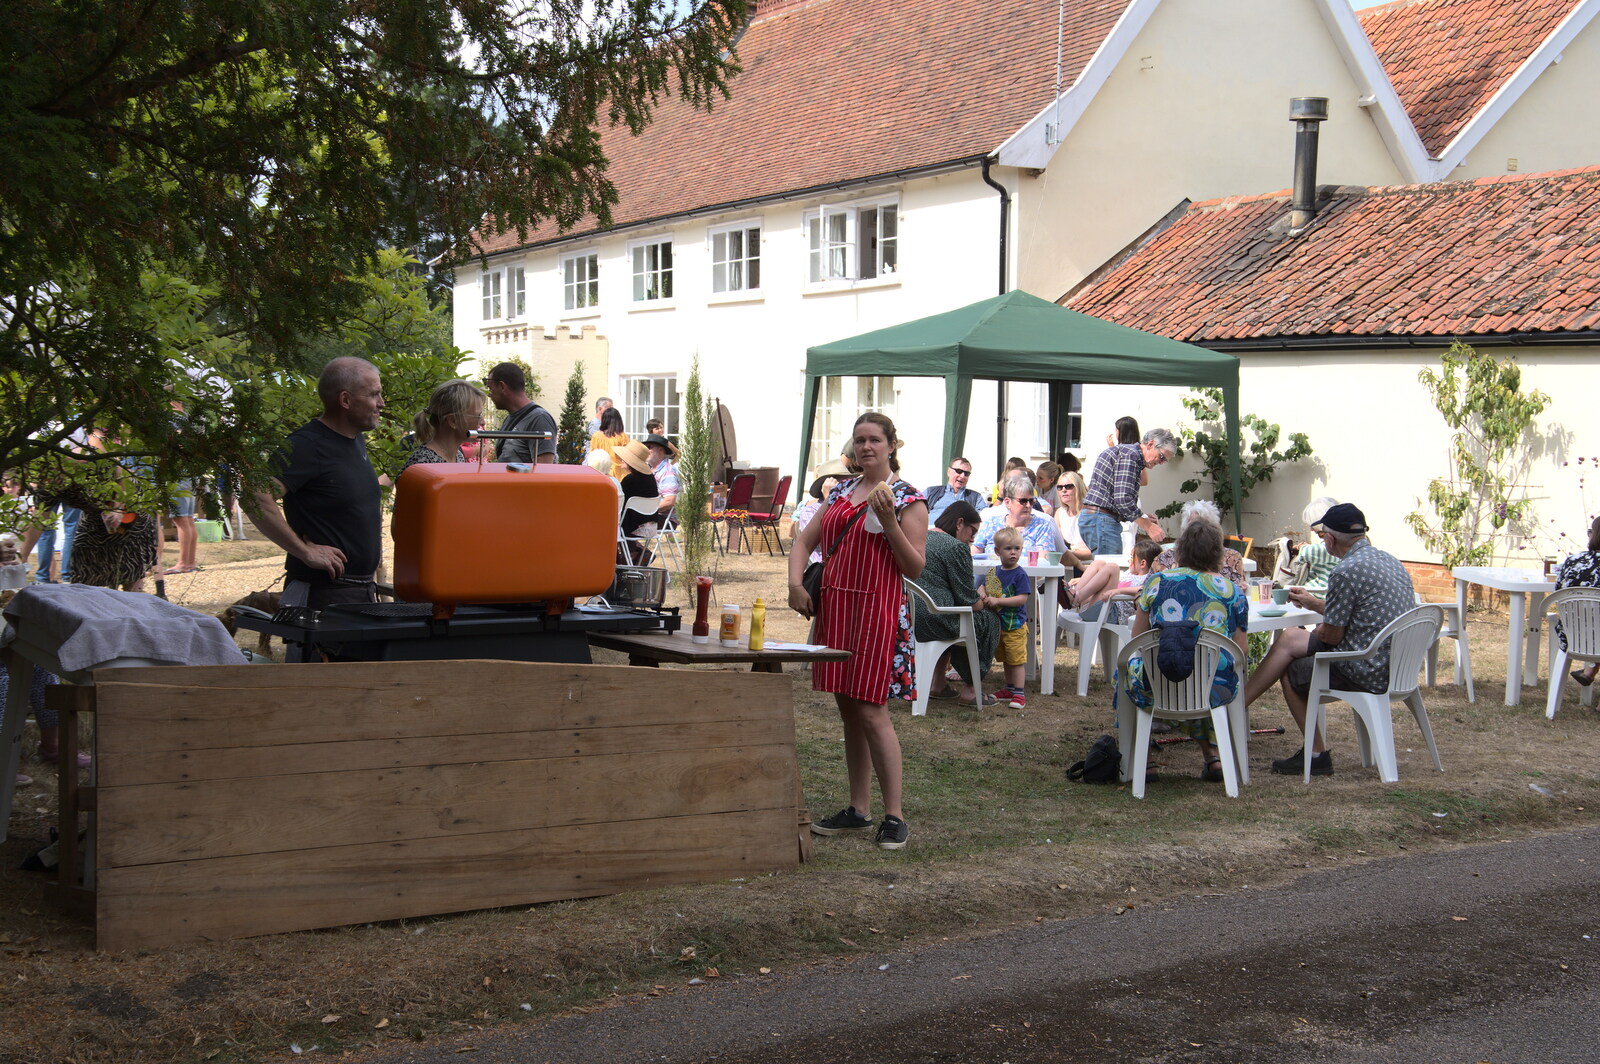 Italian Cars and a Royal Proclamation, Eye, Suffolk - 11th September 2022: Isobel's at the barbeque